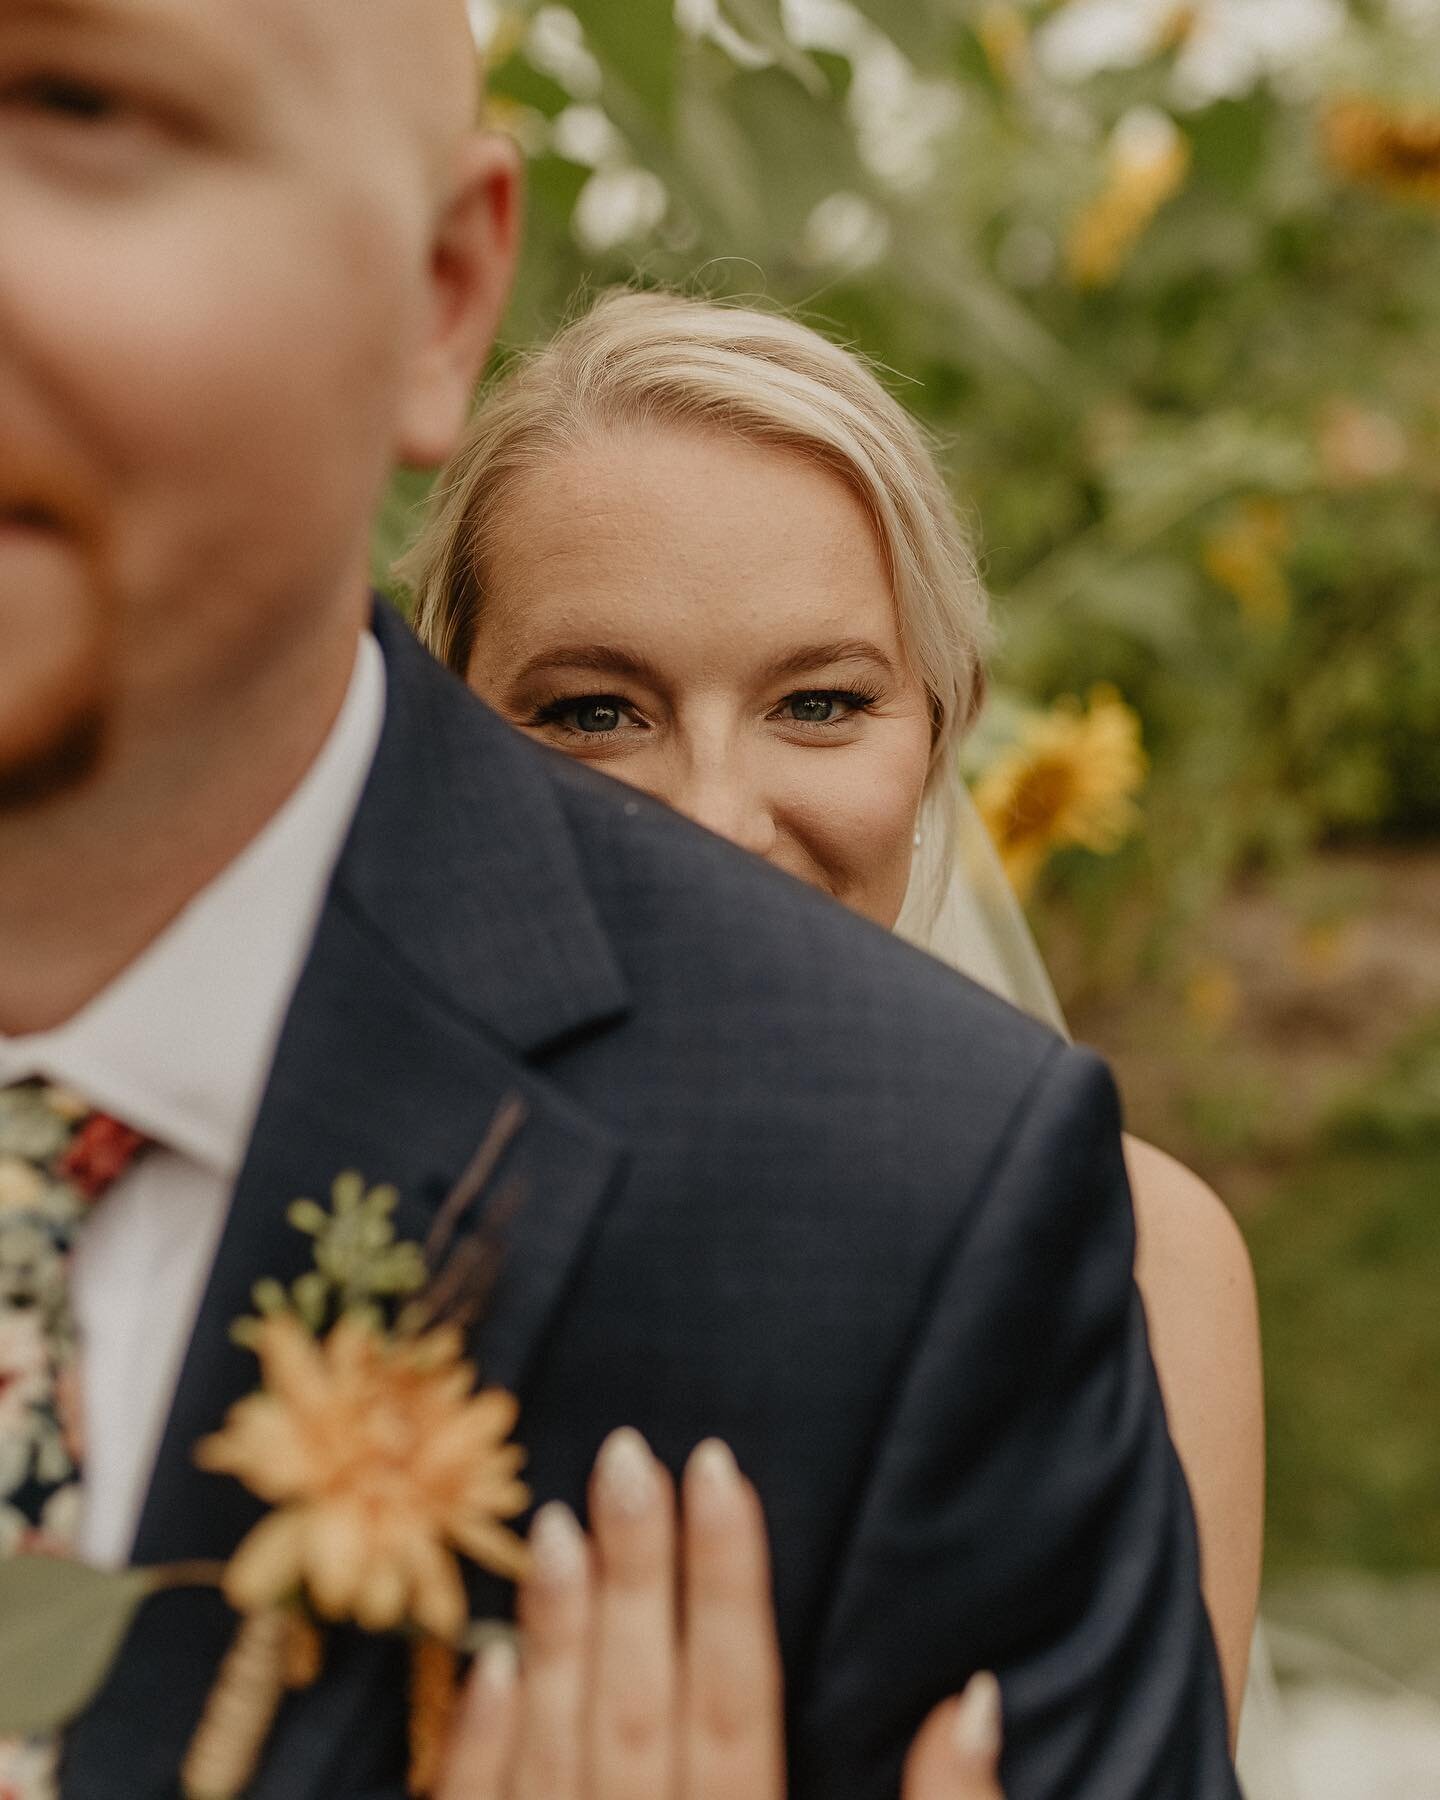 Shooting Bri and Nick&rsquo;s love in the gardens at @weddings.oftheland was dreamy to say the least.
.
.
.
.
.
#grandrapidsweddingphotographer #bridesofwestmichigan #grandrapidsbride #michiganweddingphotographer #thatsdarling #bridalportrait #bridea